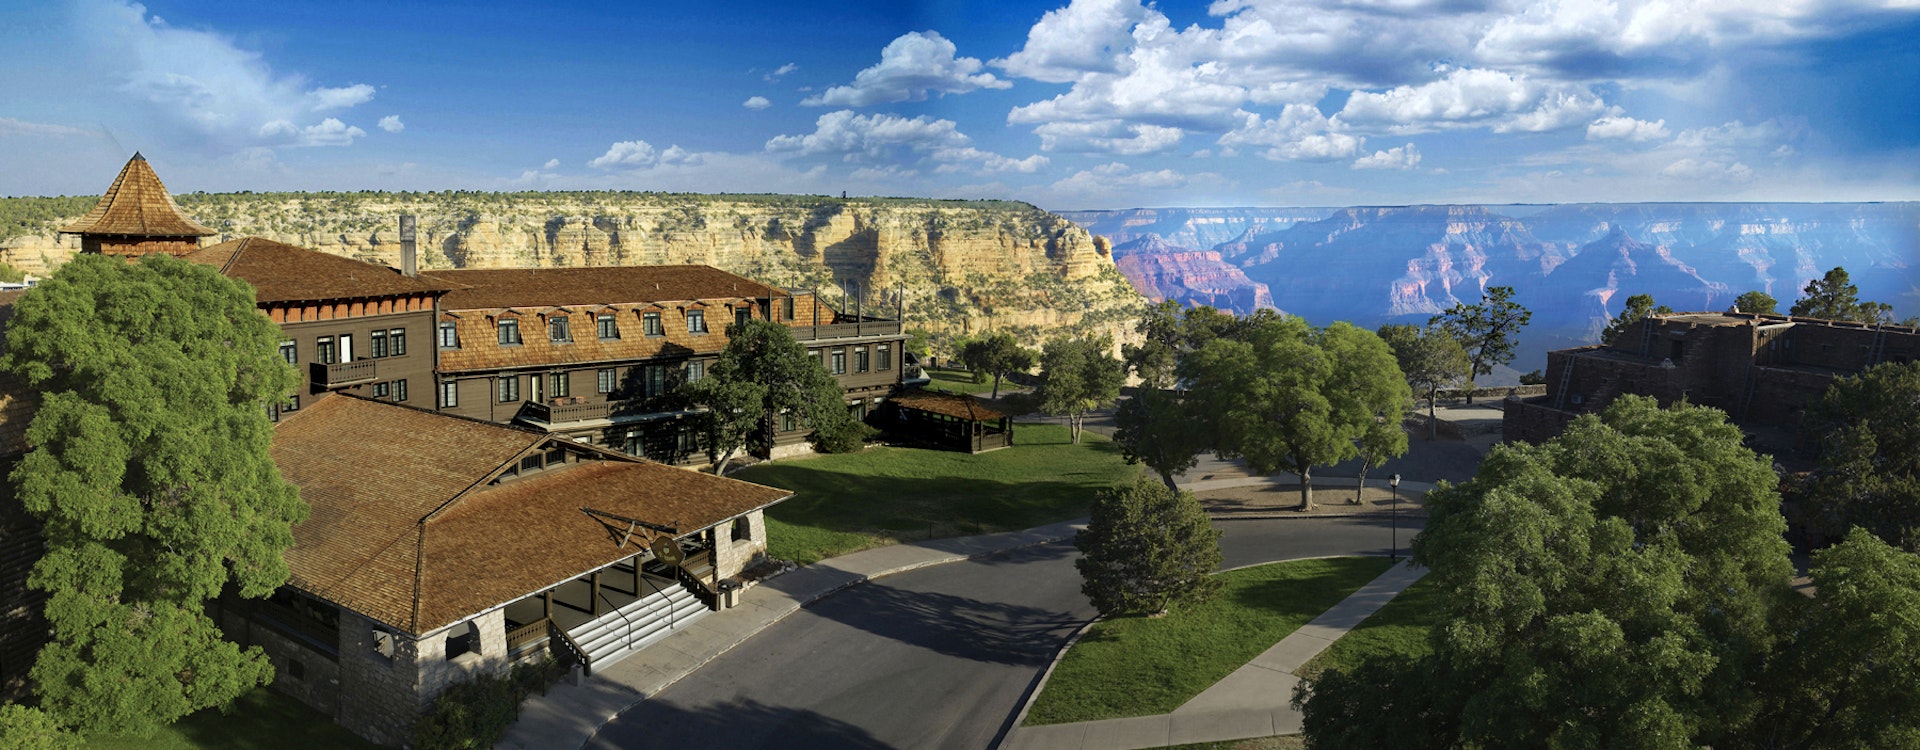 Exterior, bird's eye view of El Tovar Hotel, Grand Canyon National Park Lodge